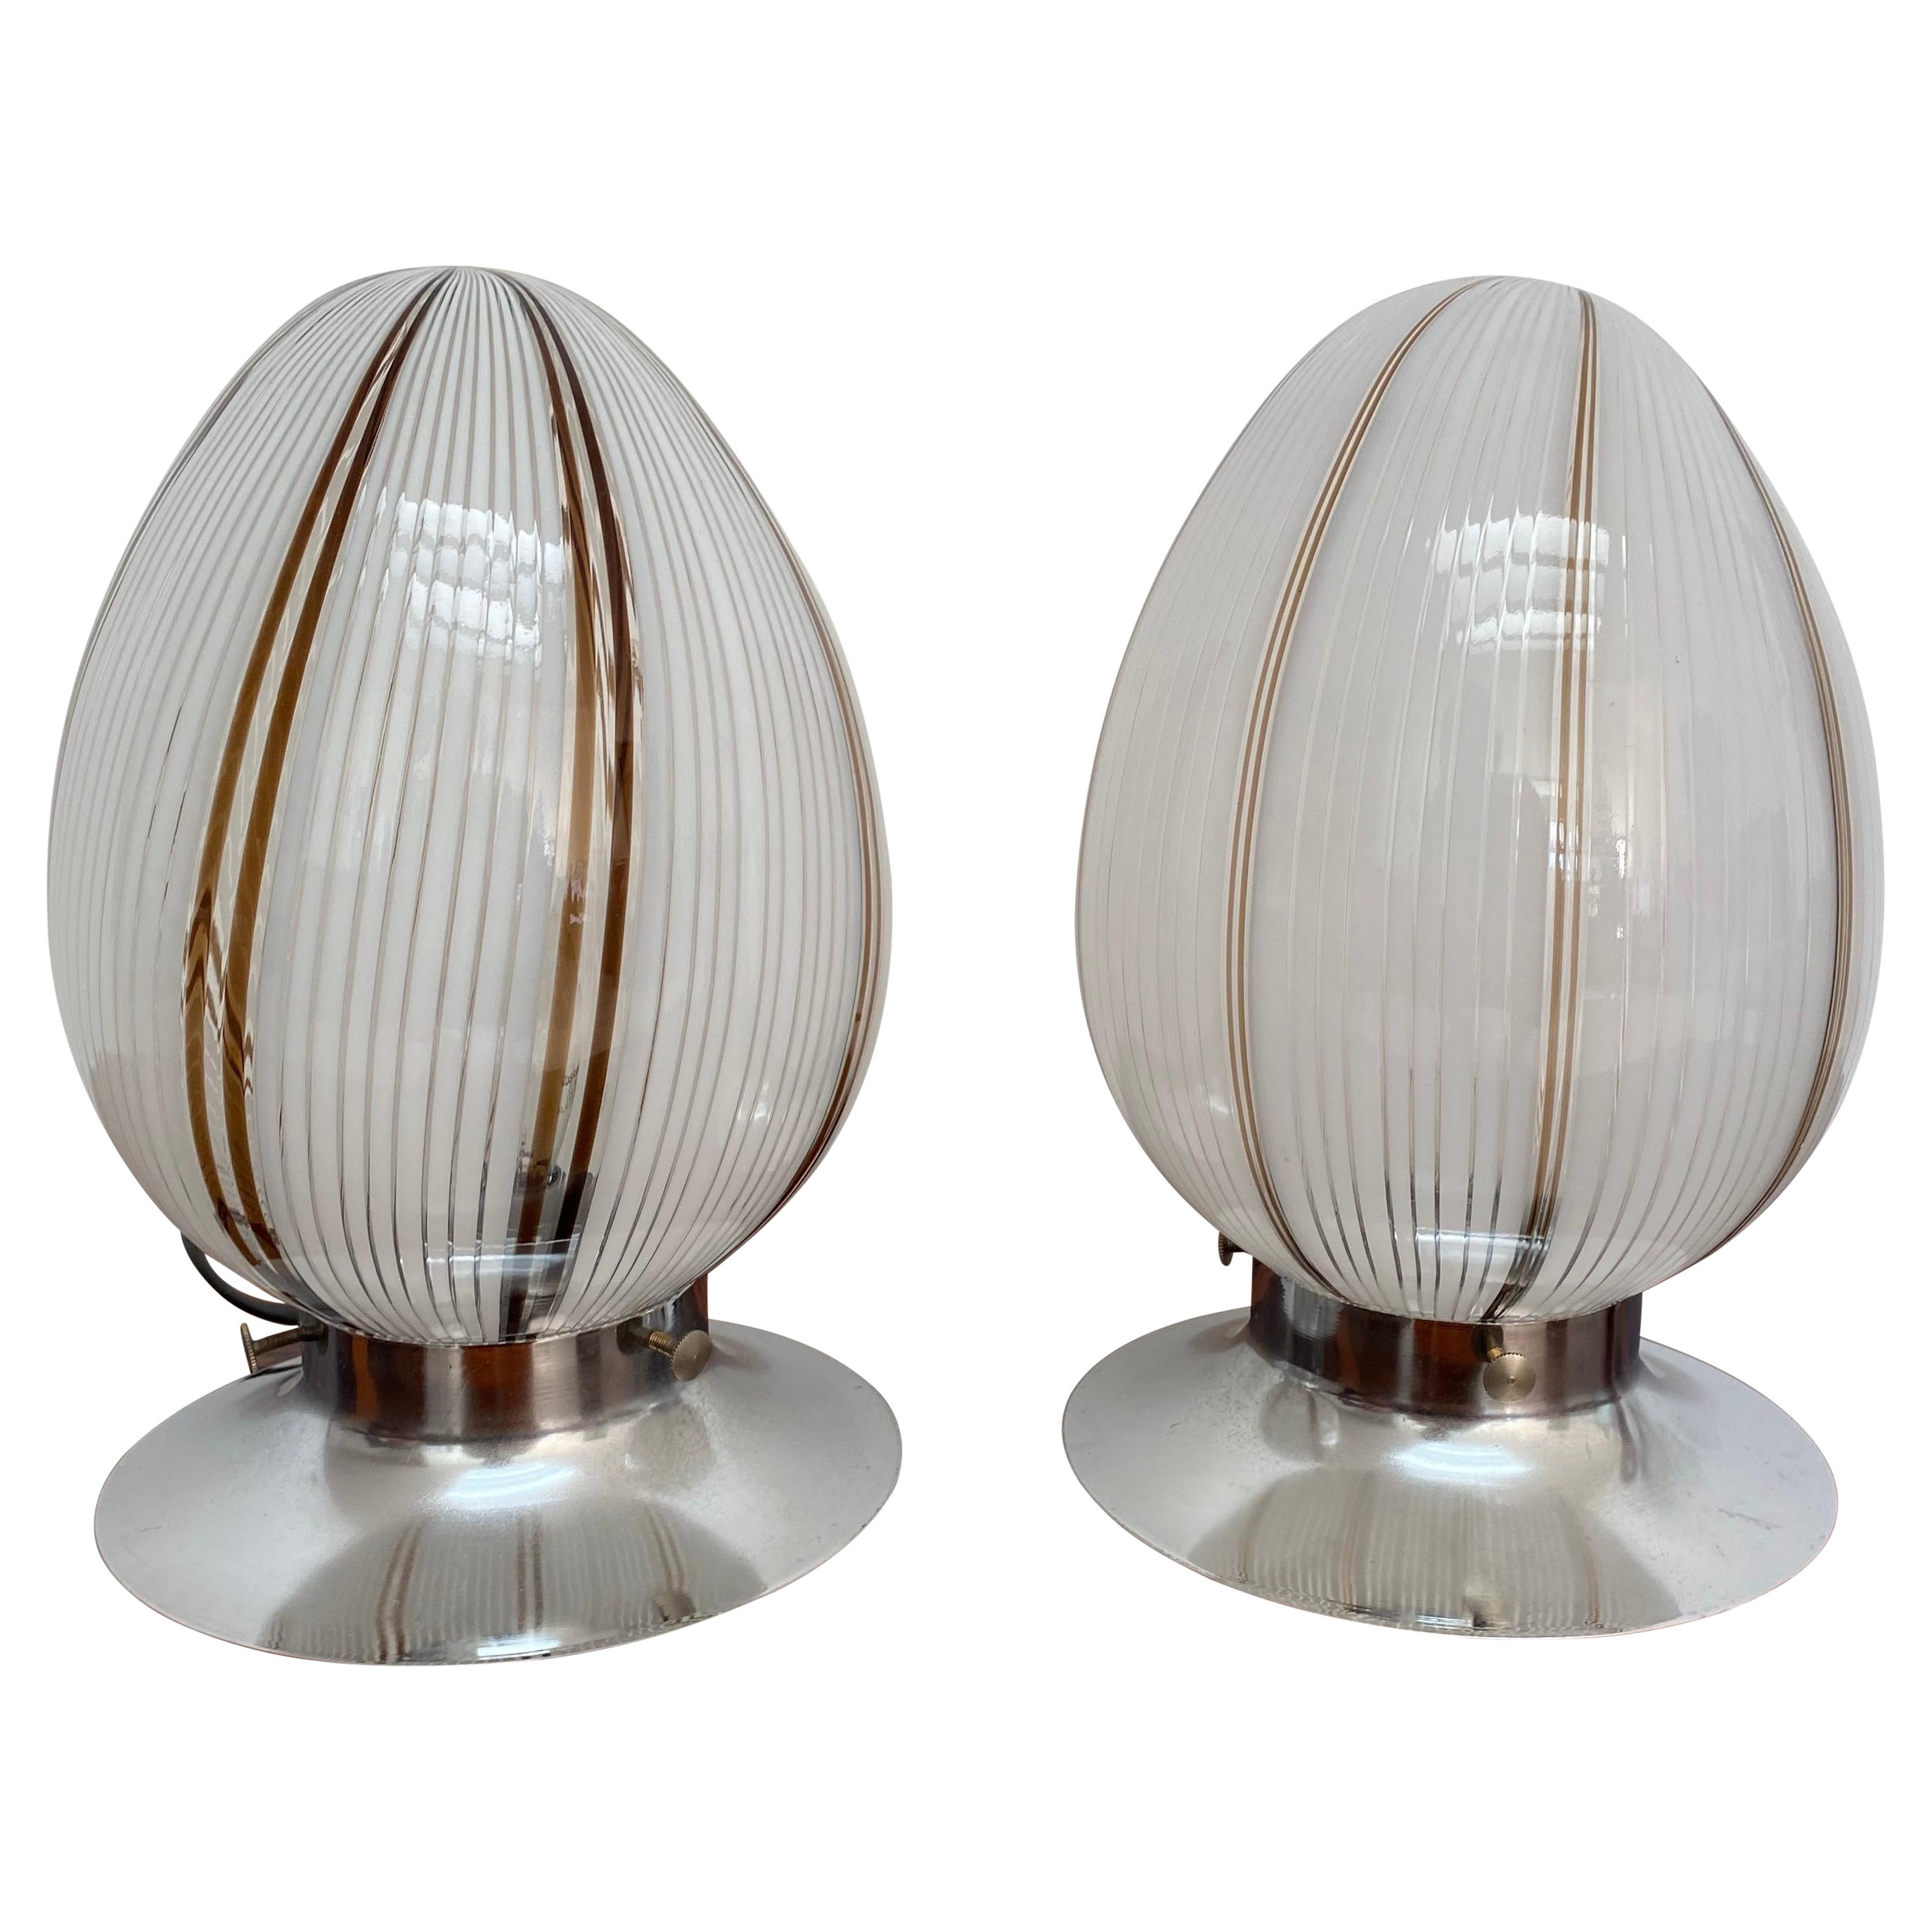 Pair of Mid-Century Modern Table Lamps Attributed to Venini, Murano, circa 1980